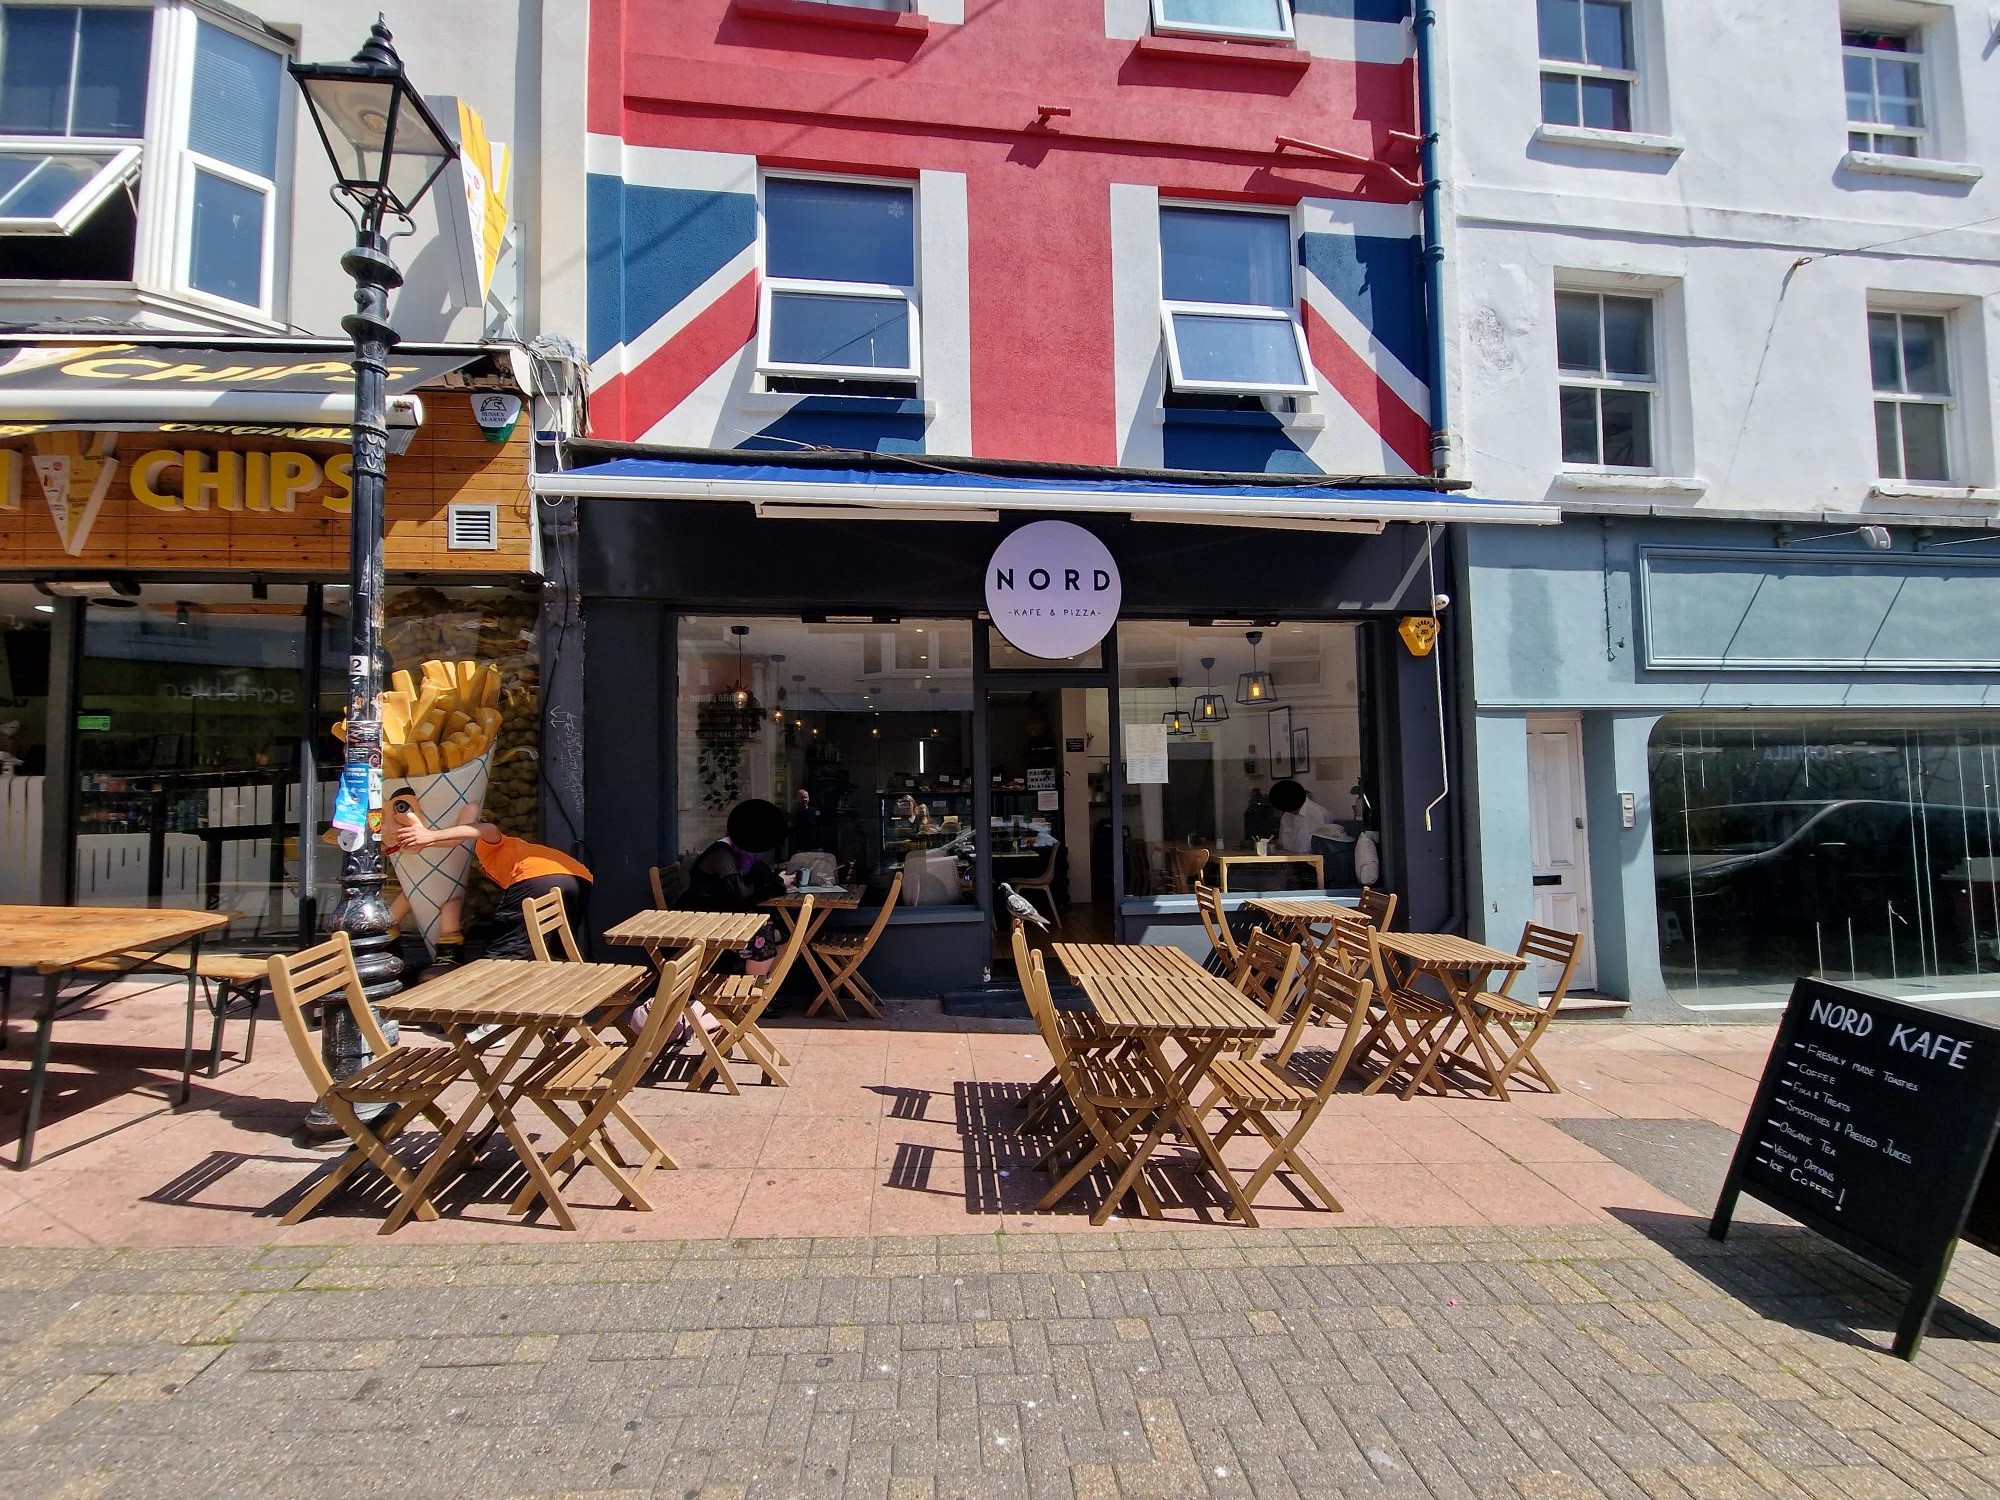 Retail Property (High Street) for rent in Brighton. From PS&B - Carr & Priddle - Brighton